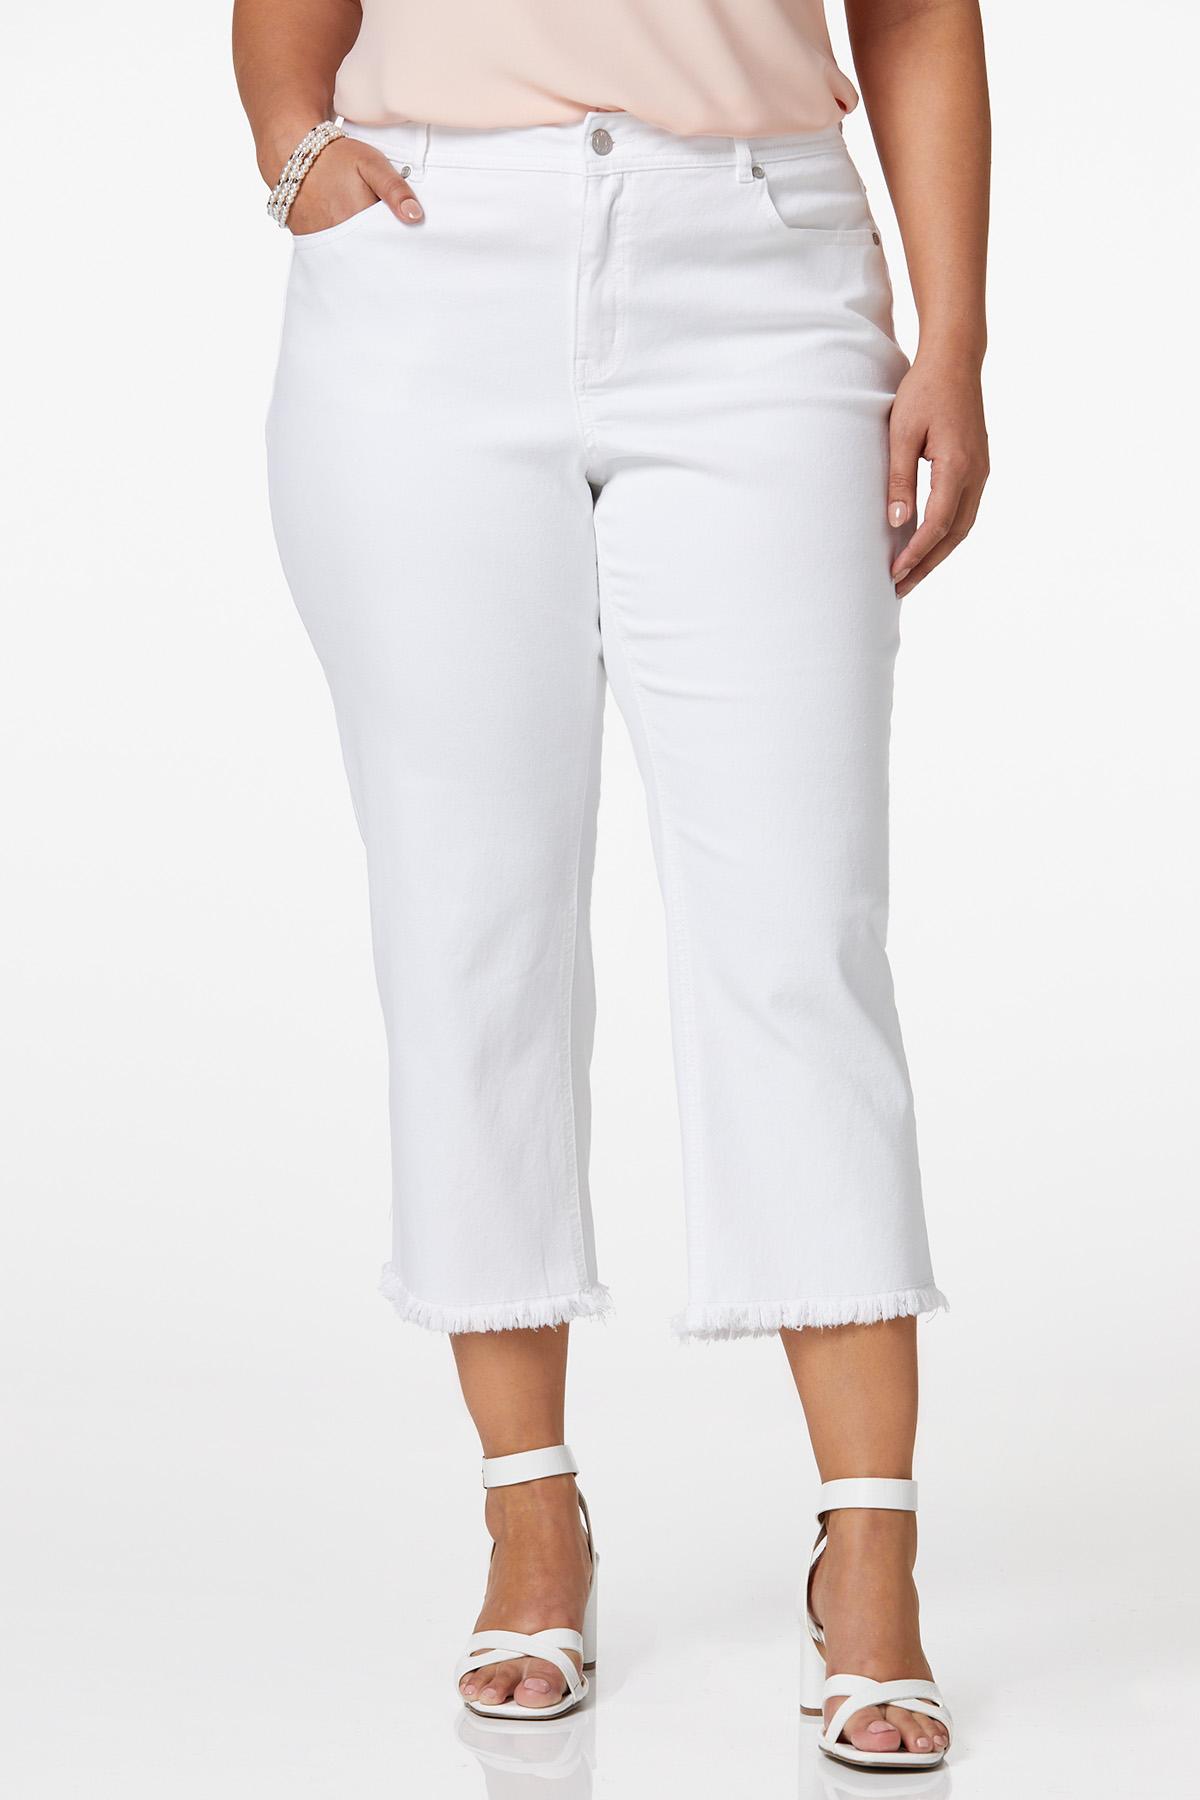 Cato Fashions  Cato Plus Size Cropped Fray Hem Jeans